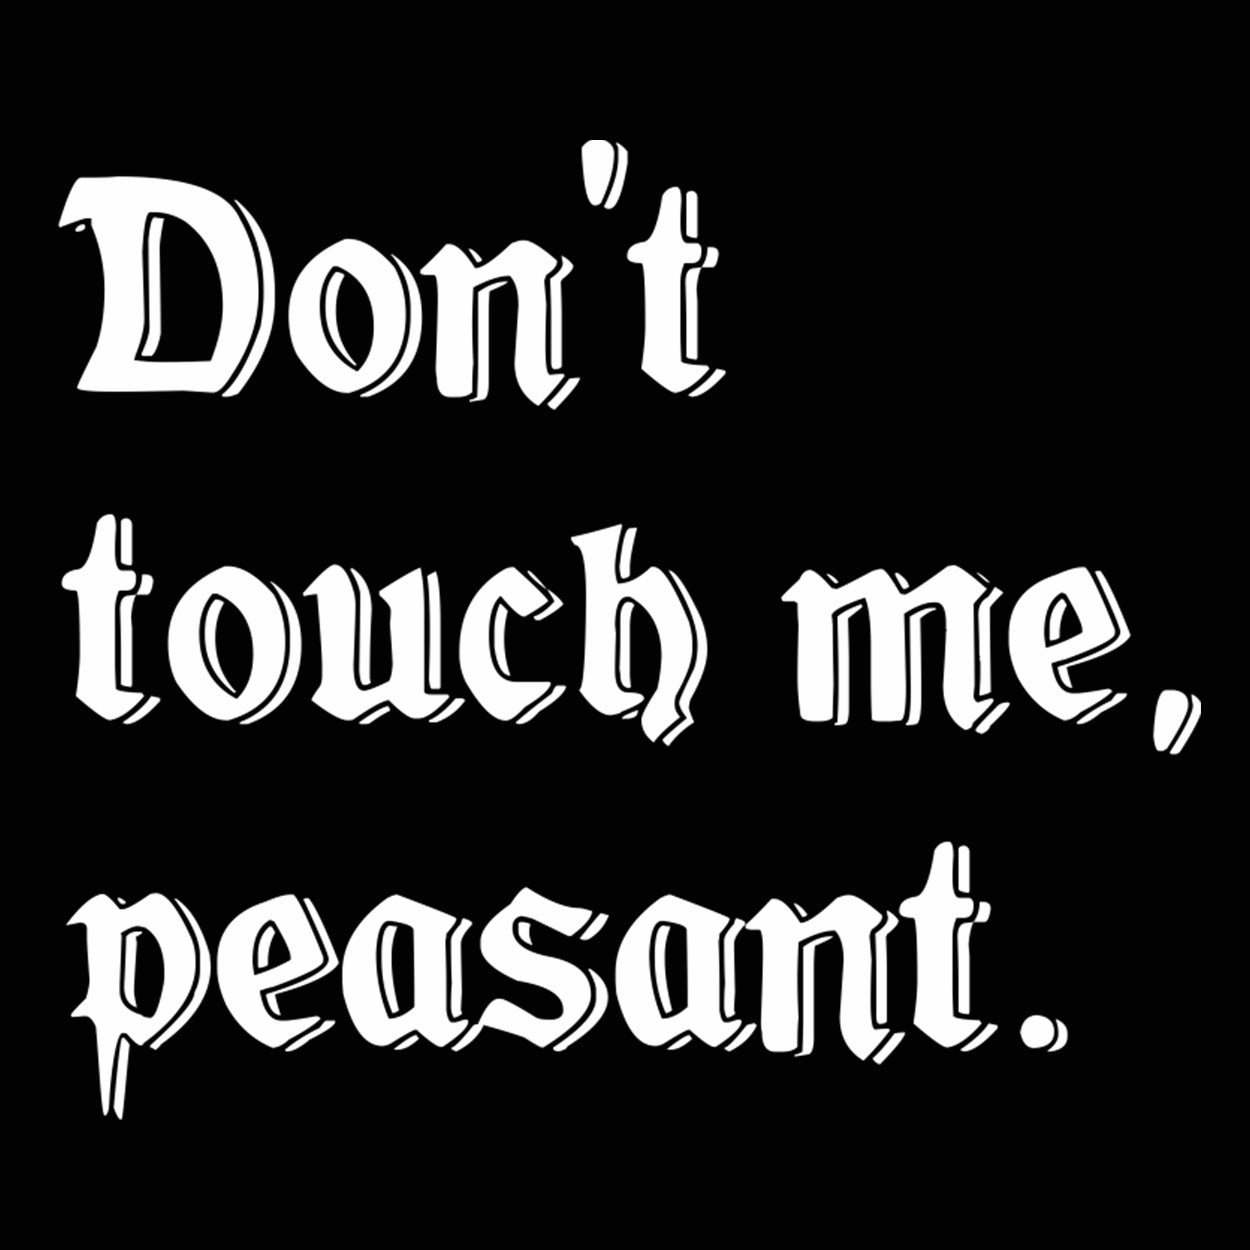 Don't Touch Me Peasant Tshirt - Donkey Tees